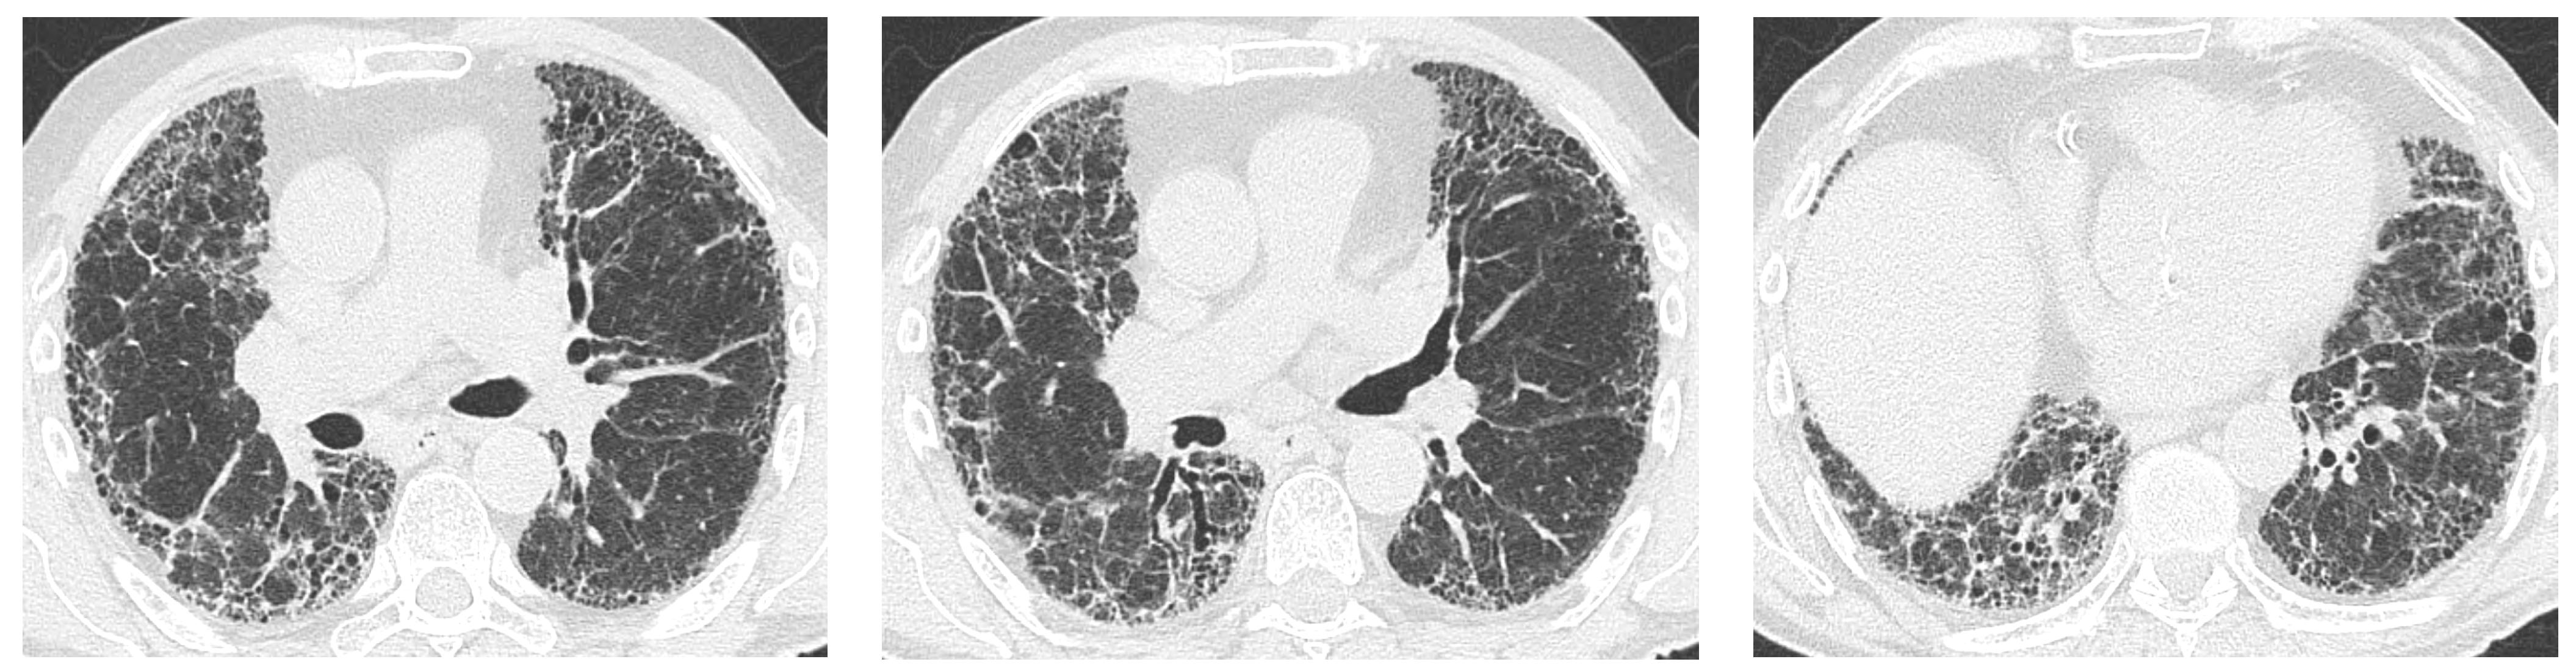 JCM Free Full-Text Primary-Sjandouml;grenandrsquo;s-Syndrome-Related Interstitial Lung Disease A Clinical Review Discussing Current Controversies picture